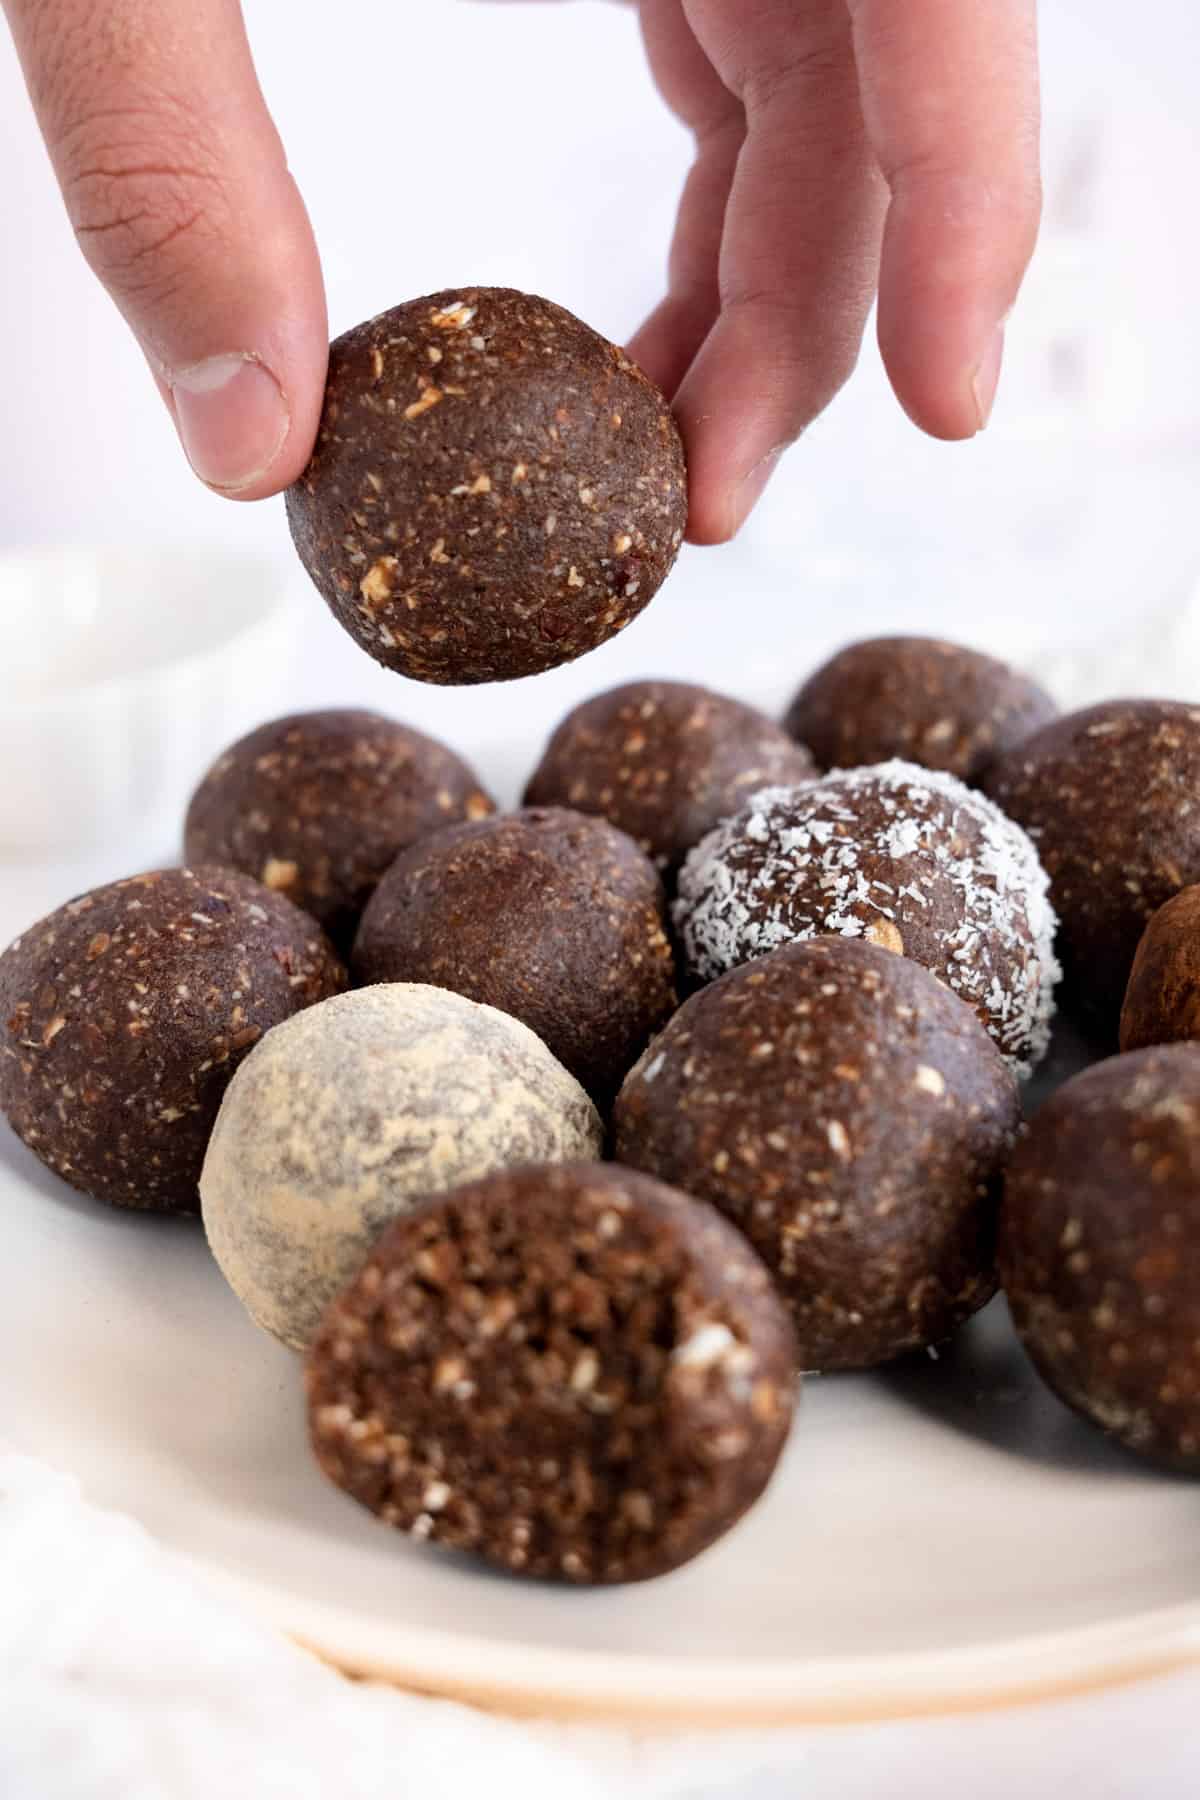 a male hand holding one chocolate ball on top of a plate full of them